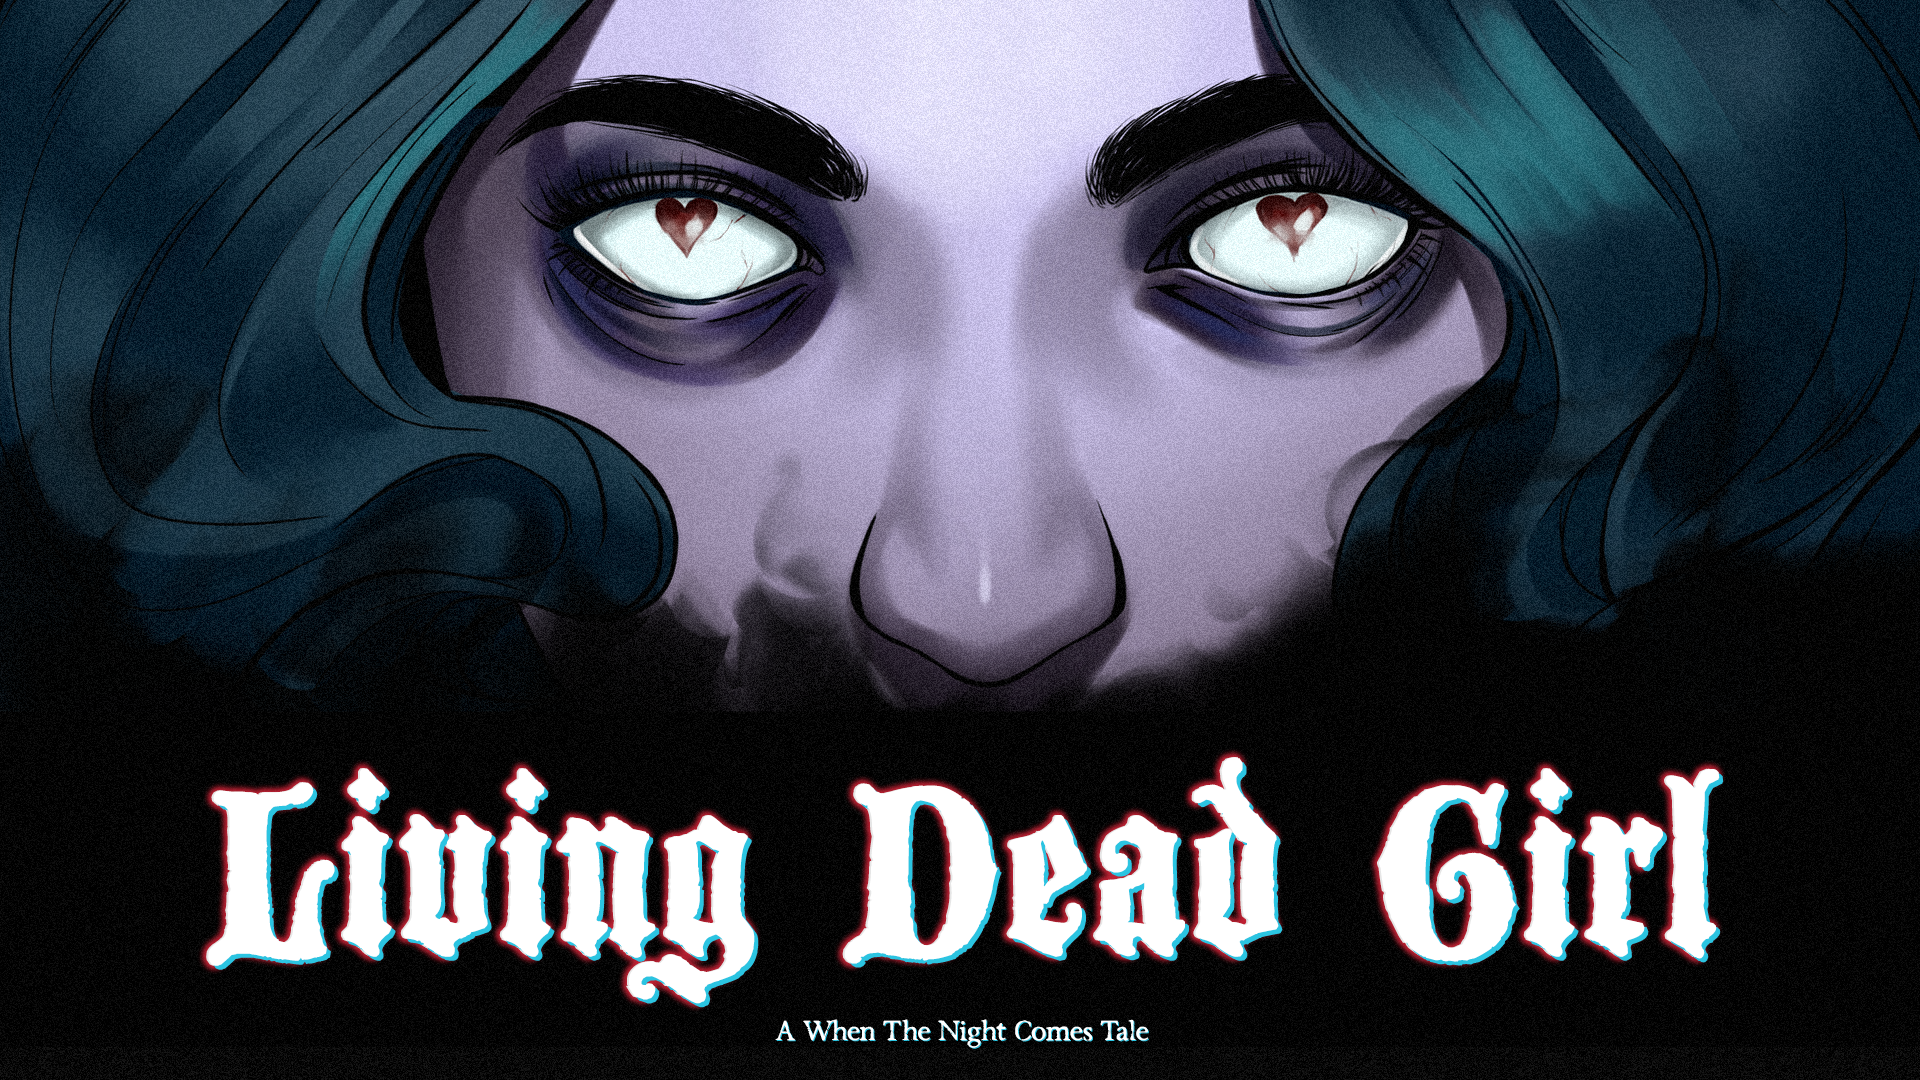 When The Night Comes: Living Dead Girl